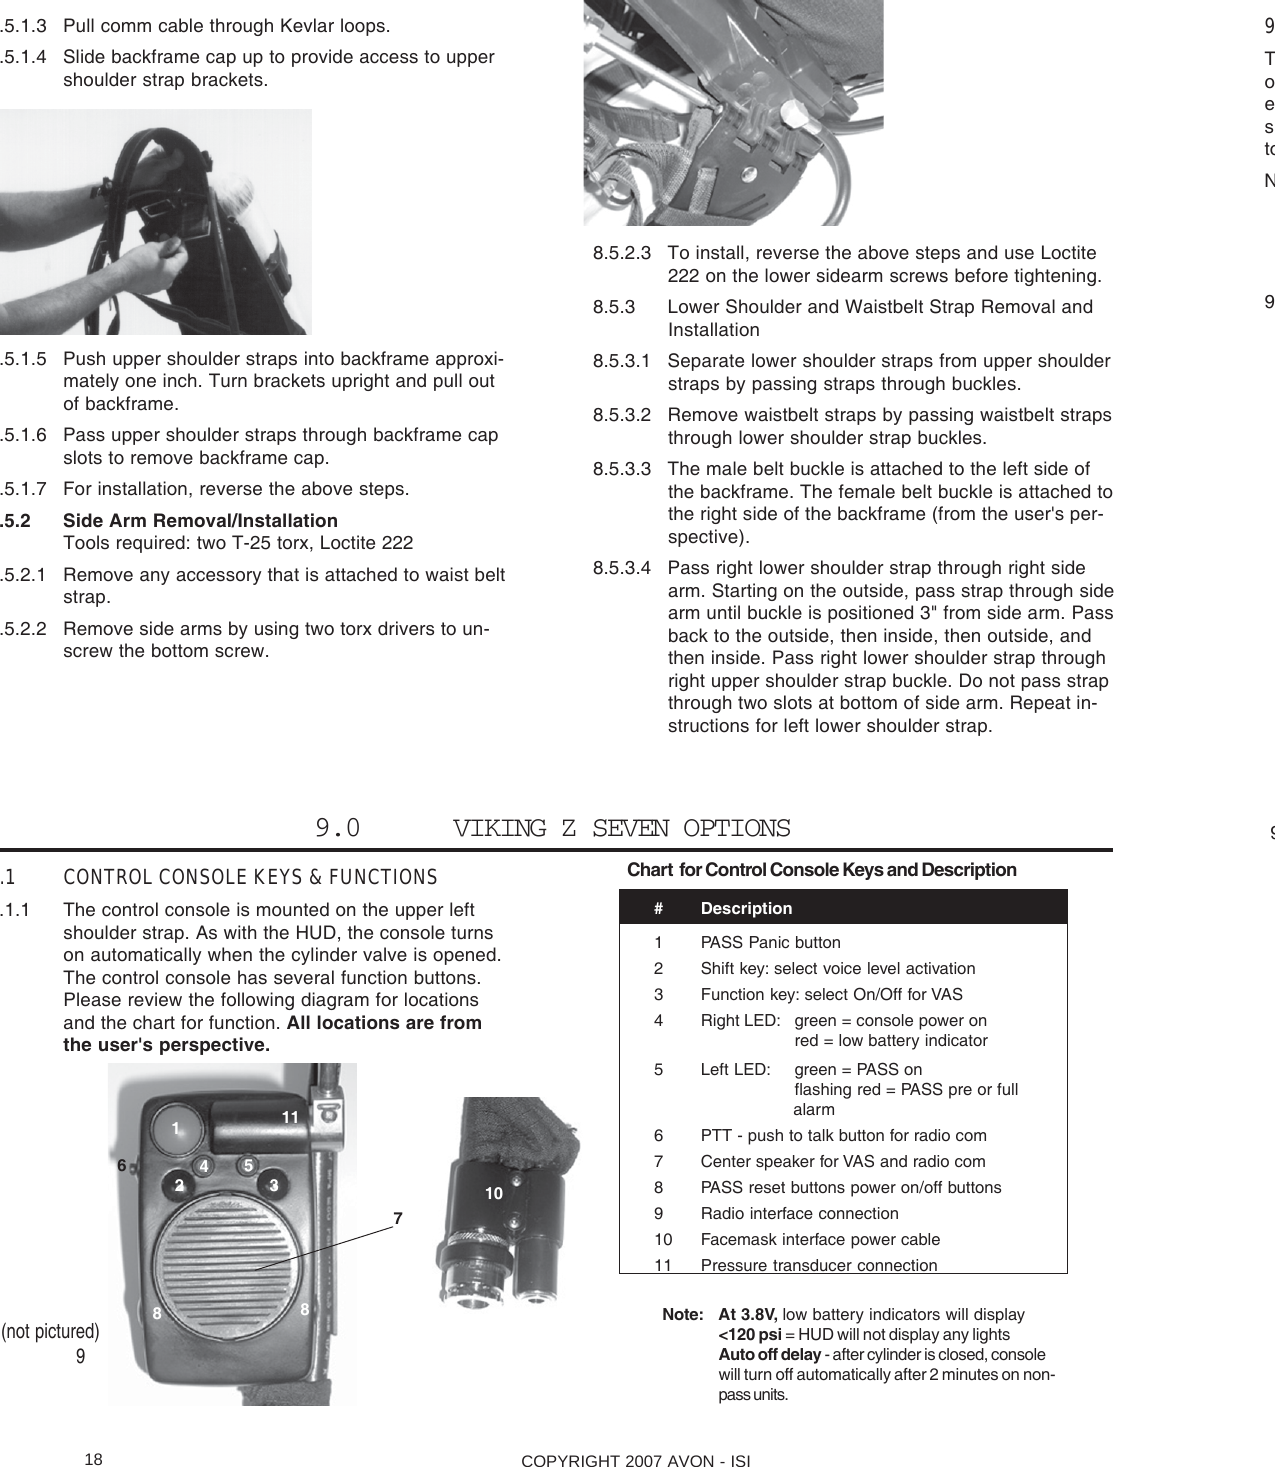 COPYRIGHT 2007 AVON - ISI18.5.1.3 Pull comm cable through Kevlar loops..5.1.4 Slide backframe cap up to provide access to uppershoulder strap brackets..5.1.5 Push upper shoulder straps into backframe approxi-mately one inch. Turn brackets upright and pull outof backframe..5.1.6 Pass upper shoulder straps through backframe capslots to remove backframe cap..5.1.7 For installation, reverse the above steps..5.2 Side Arm Removal/InstallationTools required: two T-25 torx, Loctite 222.5.2.1 Remove any accessory that is attached to waist beltstrap..5.2.2 Remove side arms by using two torx drivers to un-screw the bottom screw.9ToestoN9 98.5.2.3 To install, reverse the above steps and use Loctite222 on the lower sidearm screws before tightening.8.5.3 Lower Shoulder and Waistbelt Strap Removal andInstallation8.5.3.1 Separate lower shoulder straps from upper shoulderstraps by passing straps through buckles.8.5.3.2 Remove waistbelt straps by passing waistbelt strapsthrough lower shoulder strap buckles.8.5.3.3 The male belt buckle is attached to the left side ofthe backframe. The female belt buckle is attached tothe right side of the backframe (from the user&apos;s per-spective).8.5.3.4 Pass right lower shoulder strap through right sidearm. Starting on the outside, pass strap through sidearm until buckle is positioned 3&quot; from side arm. Passback to the outside, then inside, then outside, andthen inside. Pass right lower shoulder strap throughright upper shoulder strap buckle. Do not pass strapthrough two slots at bottom of side arm. Repeat in-structions for left lower shoulder strap.# Description1 PASS Panic button2 Shift key: select voice level activation3 Function key: select On/Off for VAS4 Right LED: green = console power onred = low battery indicator5 Left LED: green = PASS onflashing red = PASS pre or full                             alarm6 PTT - push to talk button for radio com7 Center speaker for VAS and radio com8 PASS reset buttons power on/off buttons9 Radio interface connection10 Facemask interface power cable11 Pressure transducer connectionChart  for Control Console Keys and Description.1 CONTROL CONSOLE KEYS &amp; FUNCTIONS.1.1 The control console is mounted on the upper leftshoulder strap. As with the HUD, the console turnson automatically when the cylinder valve is opened.The control console has several function buttons.Please review the following diagram for locationsand the chart for function. All locations are fromthe user&apos;s perspective.9.0      VIKING Z SEVEN OPTIONSNote: At 3.8V, low battery indicators will display&lt;120 psi = HUD will not display any lightsAuto off delay - after cylinder is closed, consolewill turn off automatically after 2 minutes on non-pass units.72356481118(not pictured)910